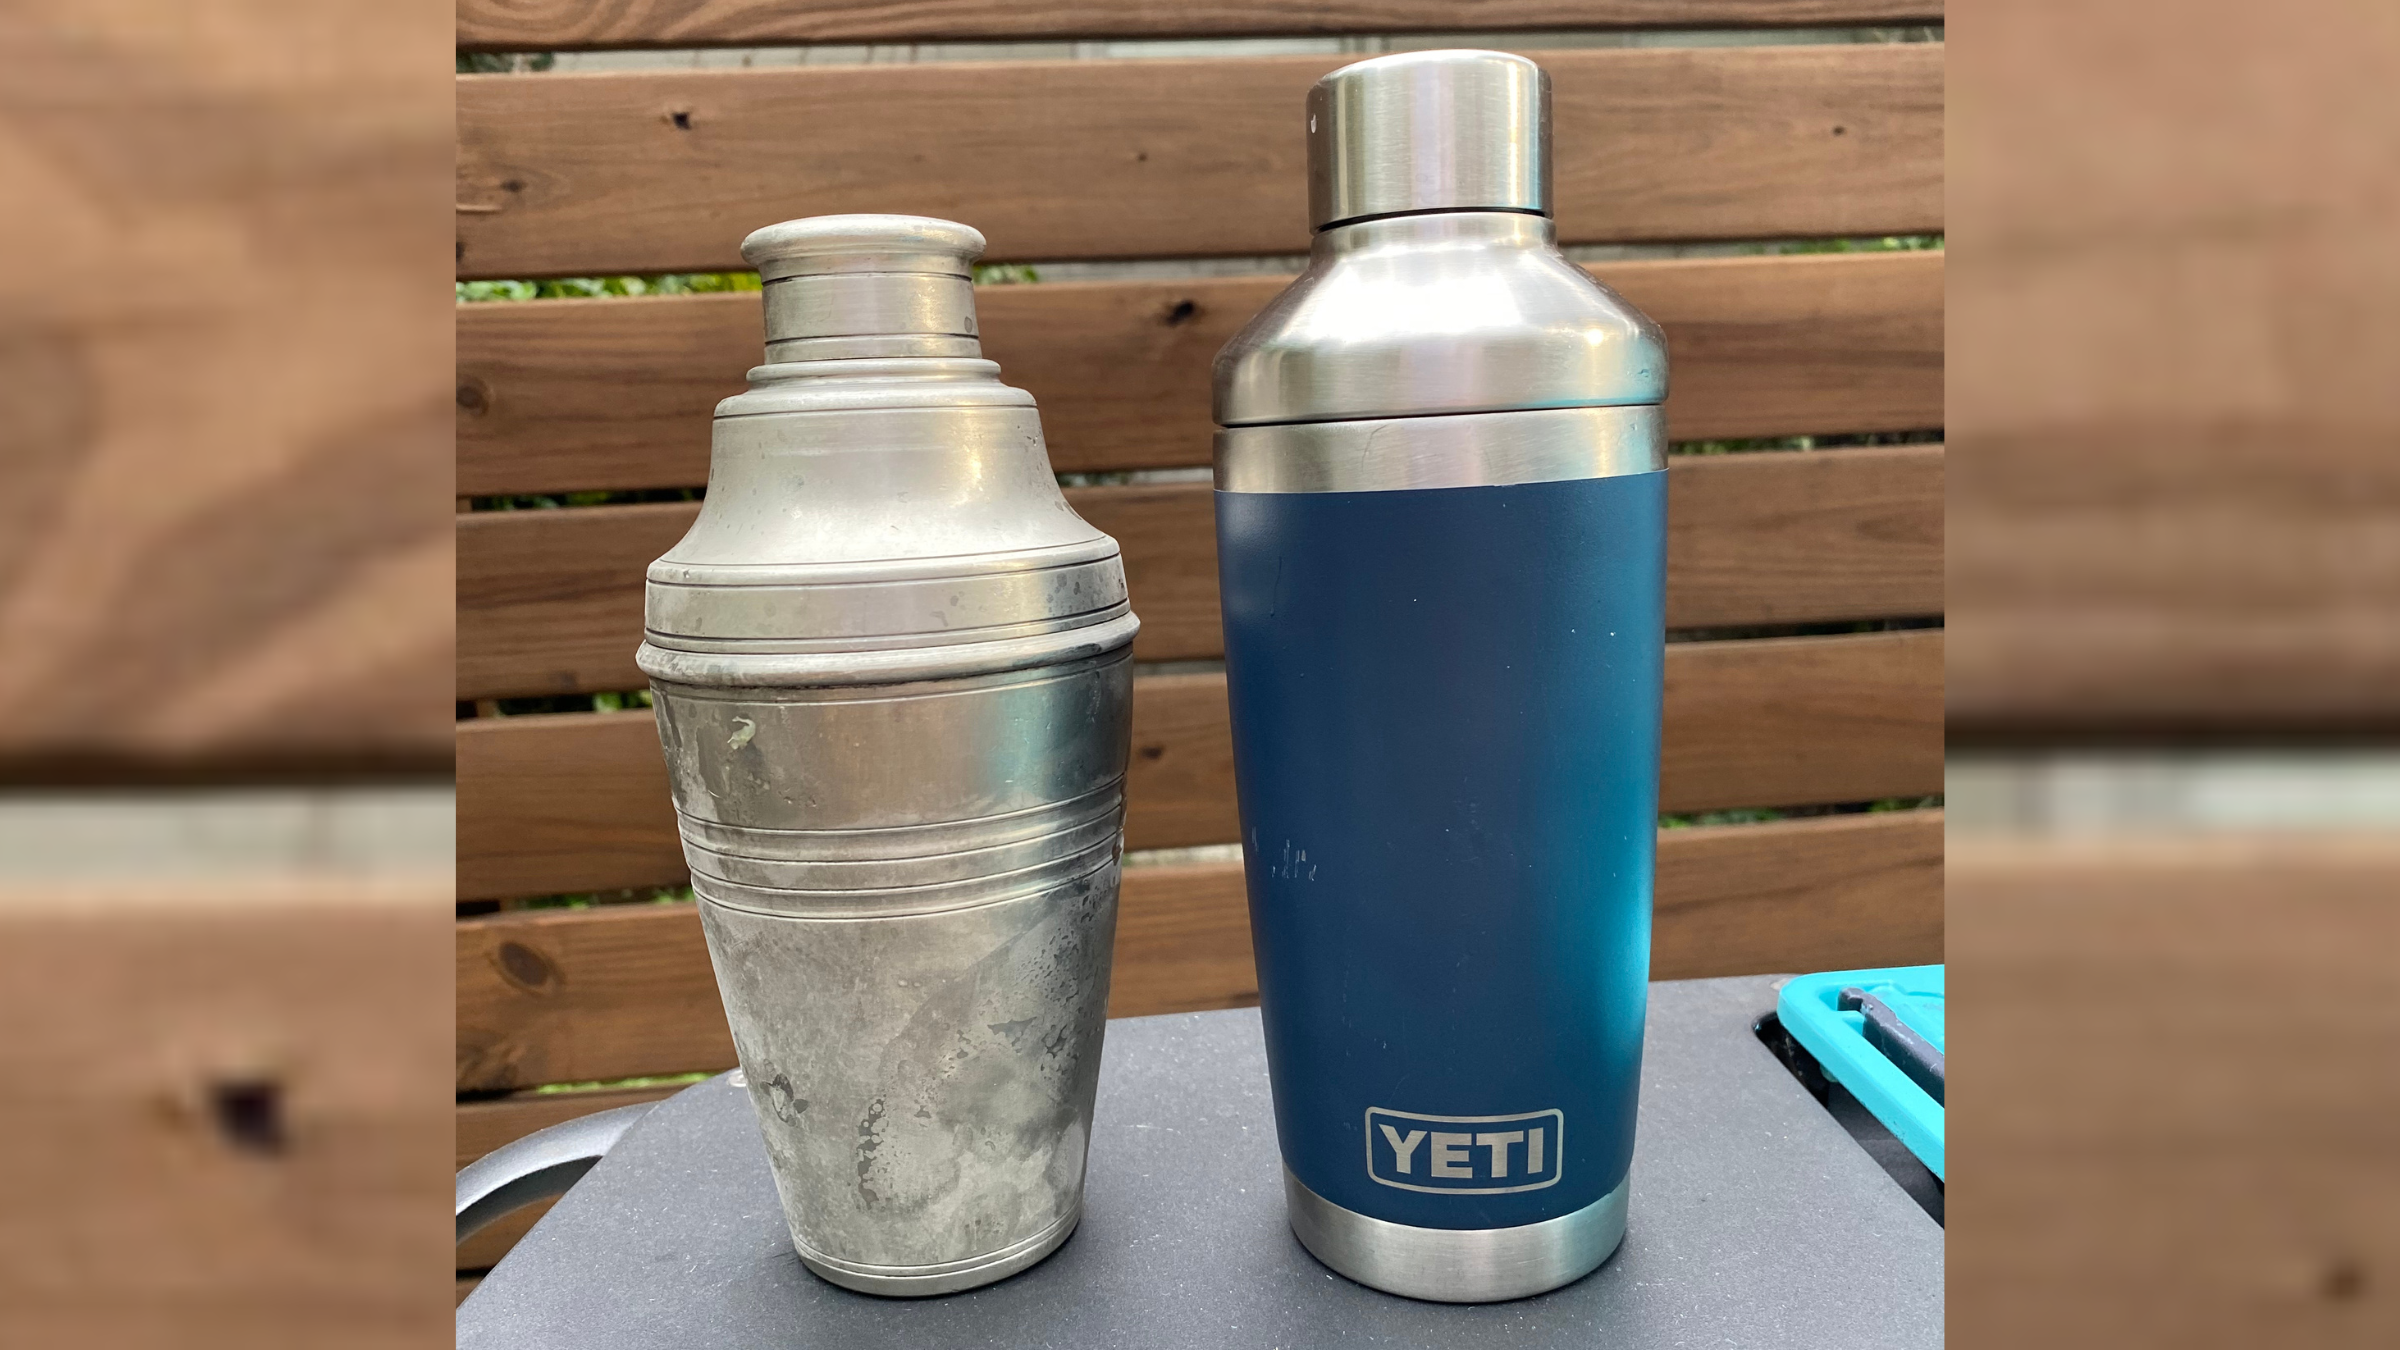 YETI is Coming Out with a $60 Cocktail Shaker – Do You Need It?